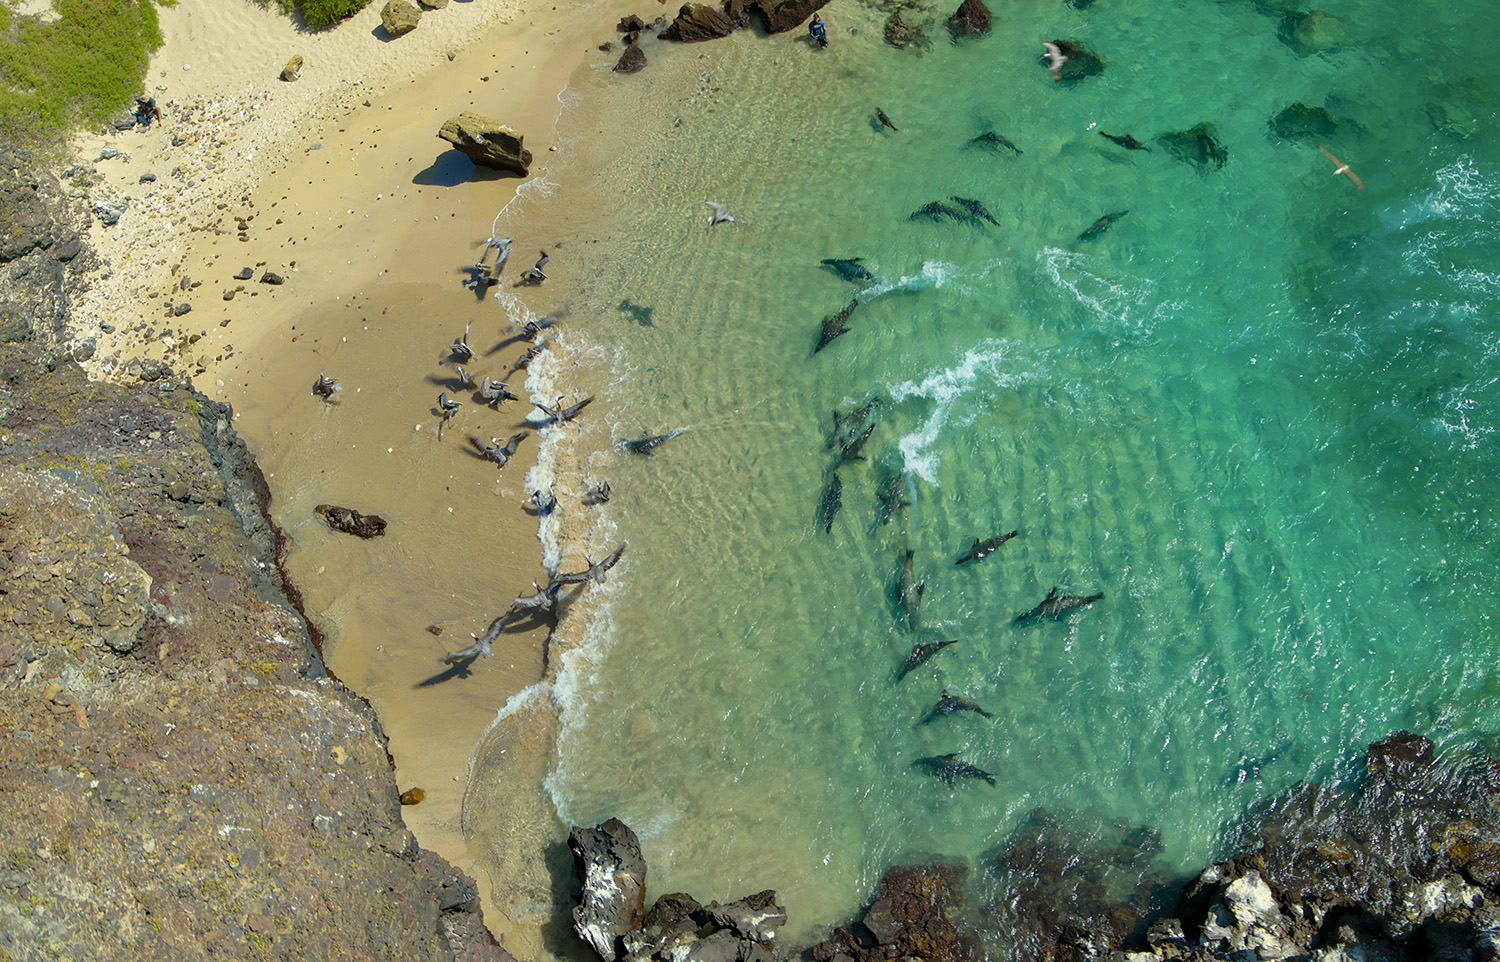 Sea lions lying on the beach and swimming in the water.